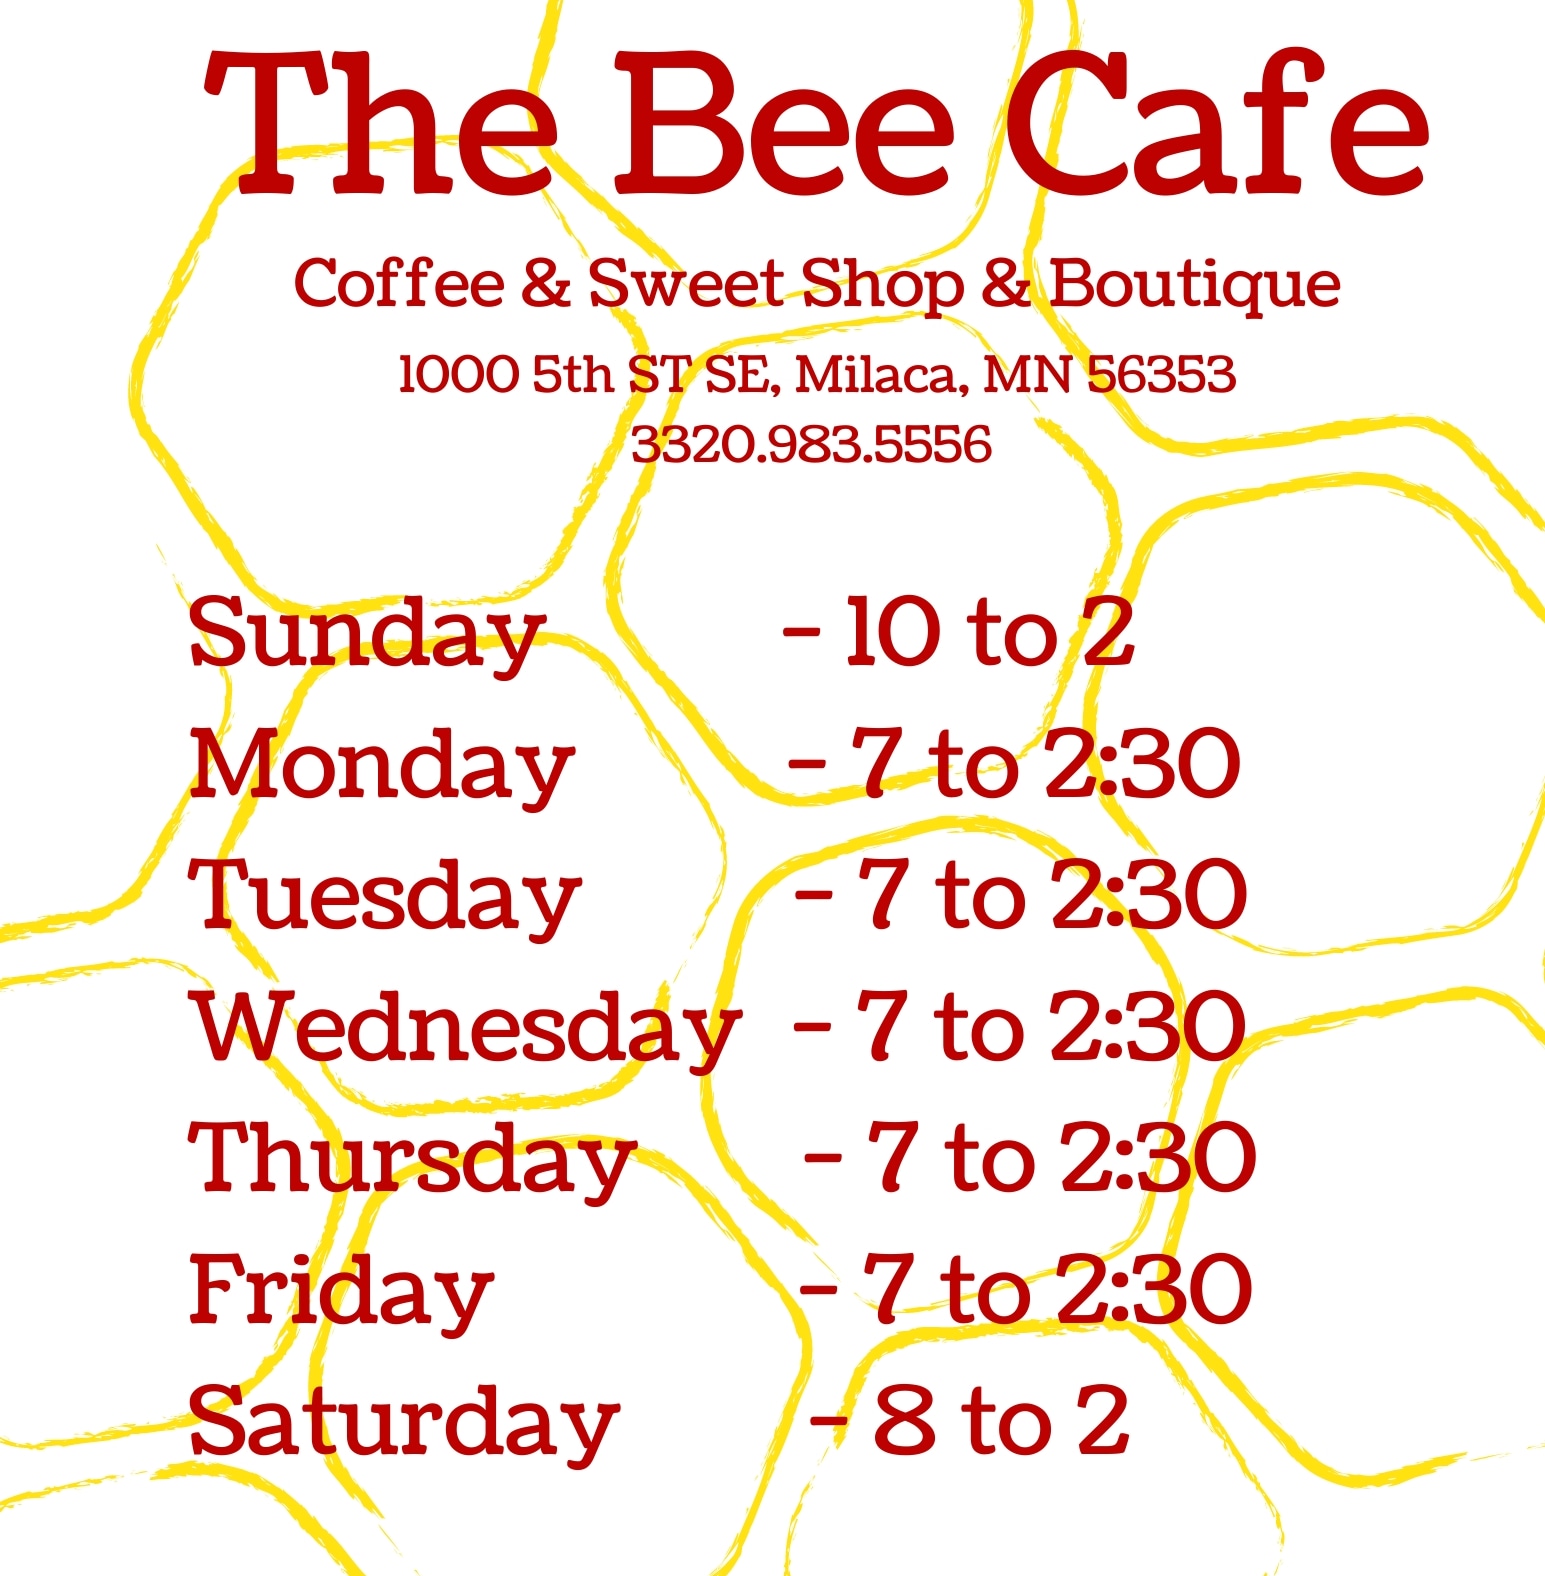 The Bee, Cafe, Coffee & Sweet Shop, Boutique 1002 5th St SE, Milaca, MN 56353